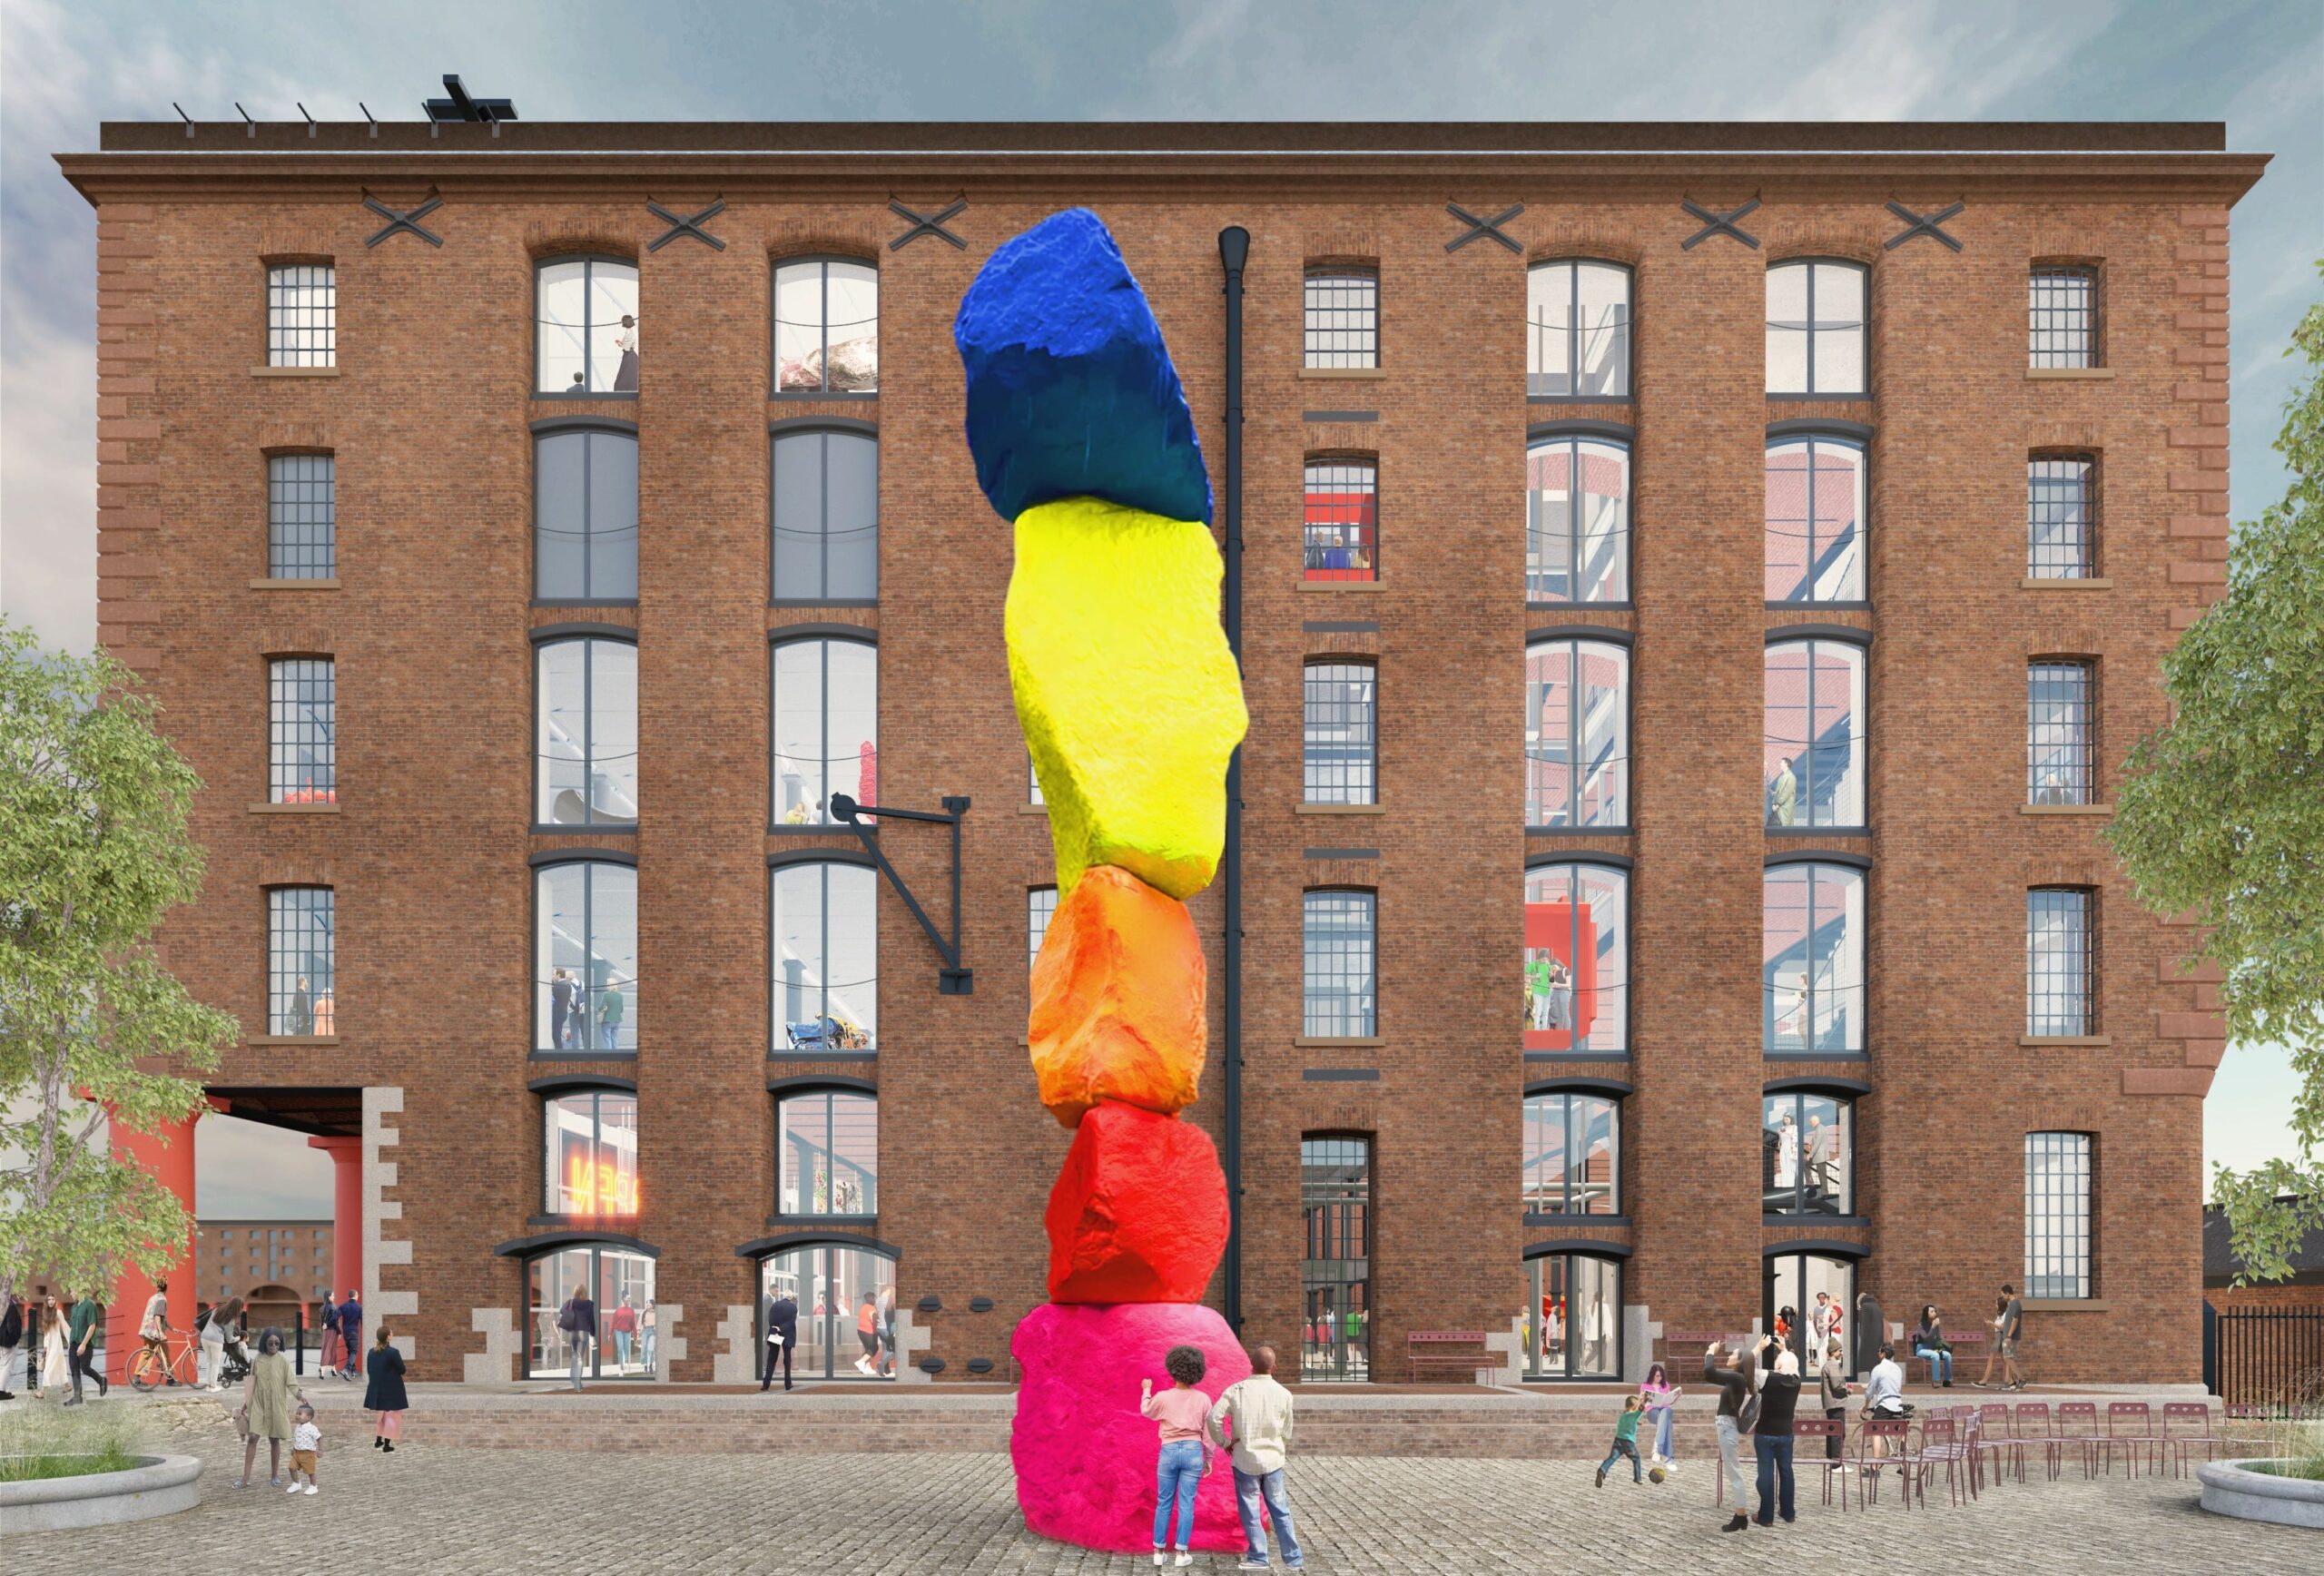 Preliminary designs revealed for Tate Liverpool transformation